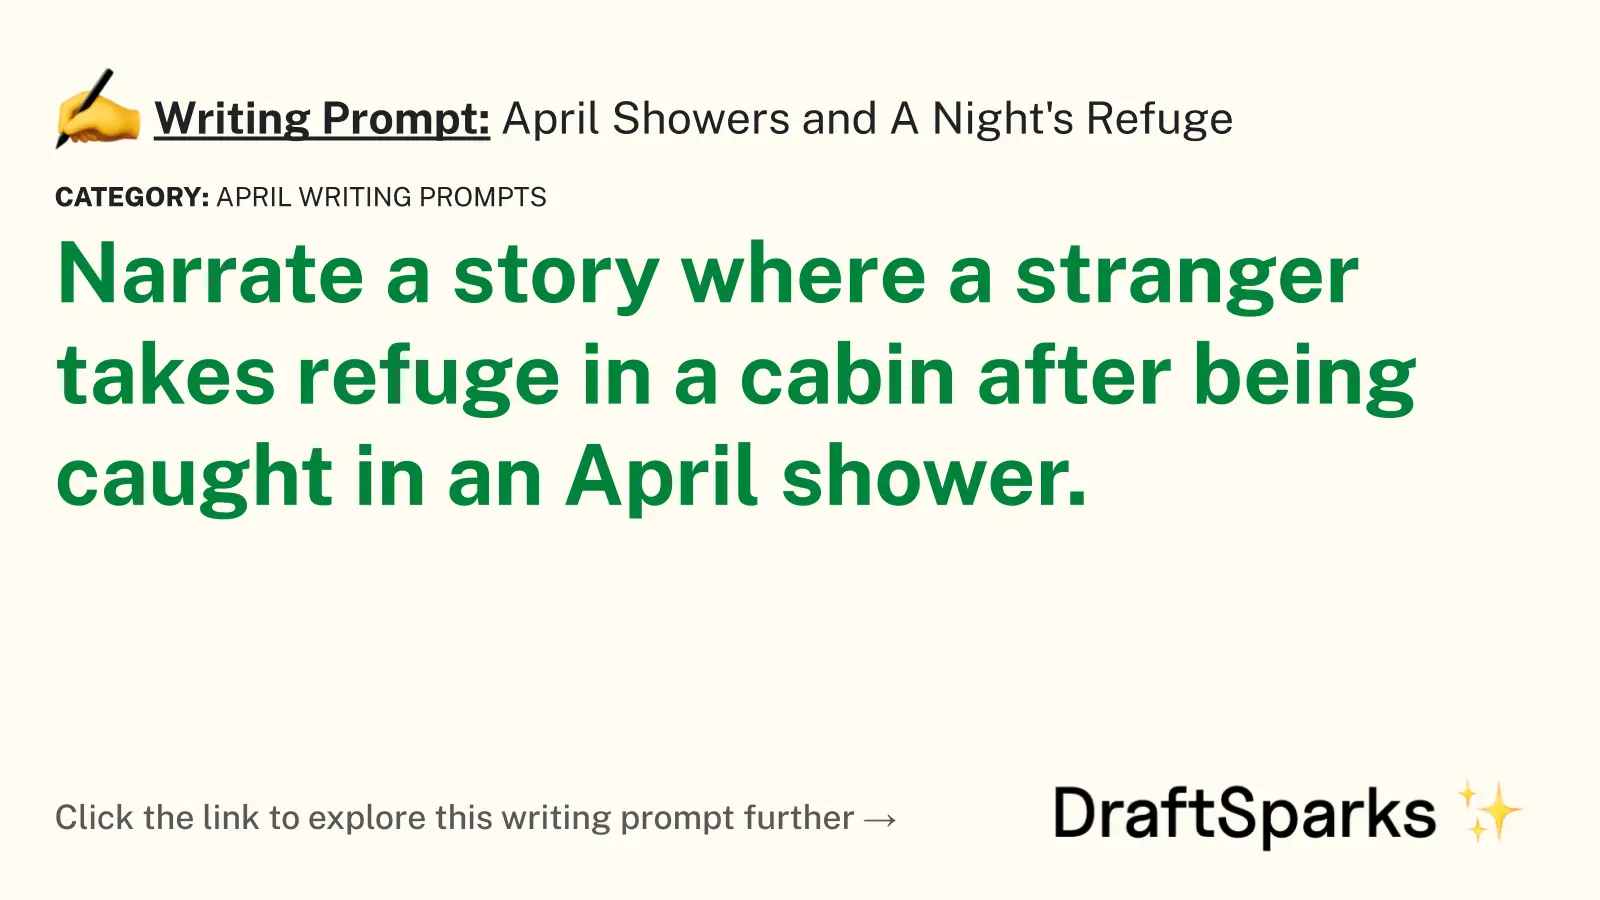 April Showers and A Night’s Refuge